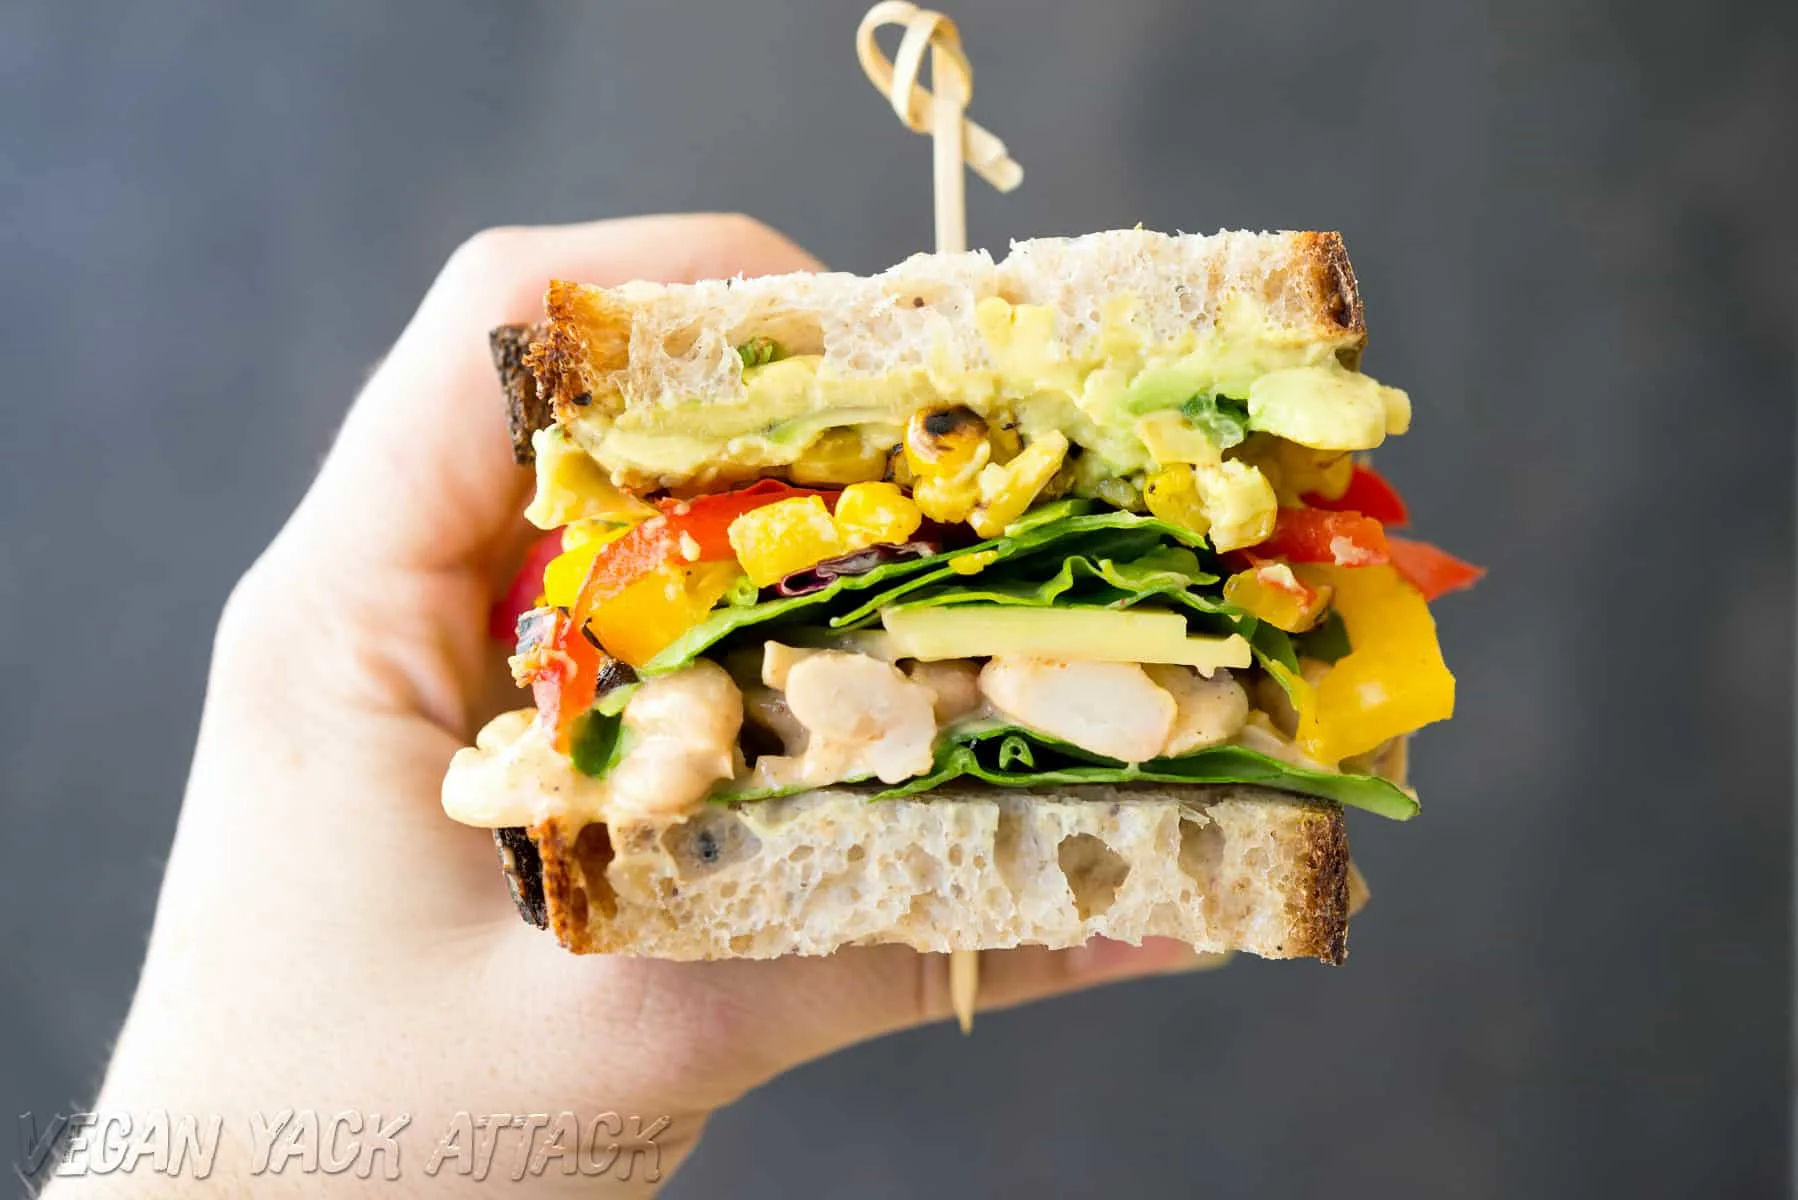 Chipotle White Bean Salad Sandwich - Super flavorful, #vegan and soy-free!